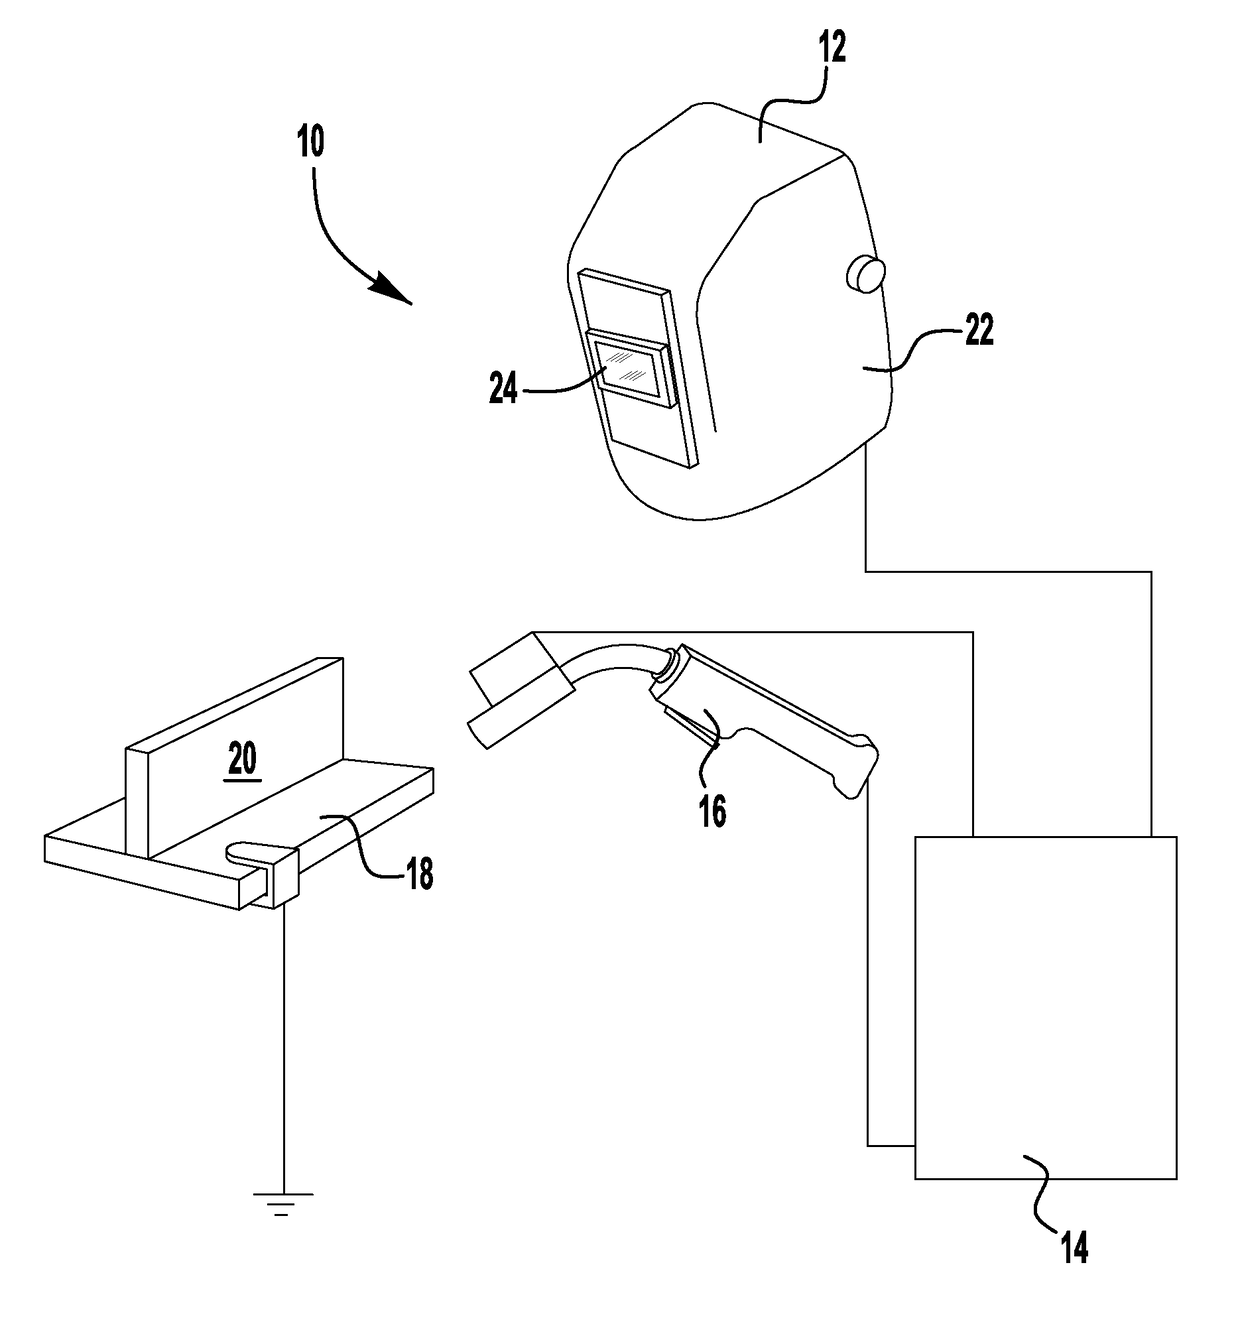 Welding trainer utilizing a head up display to display simulated and real-world objects